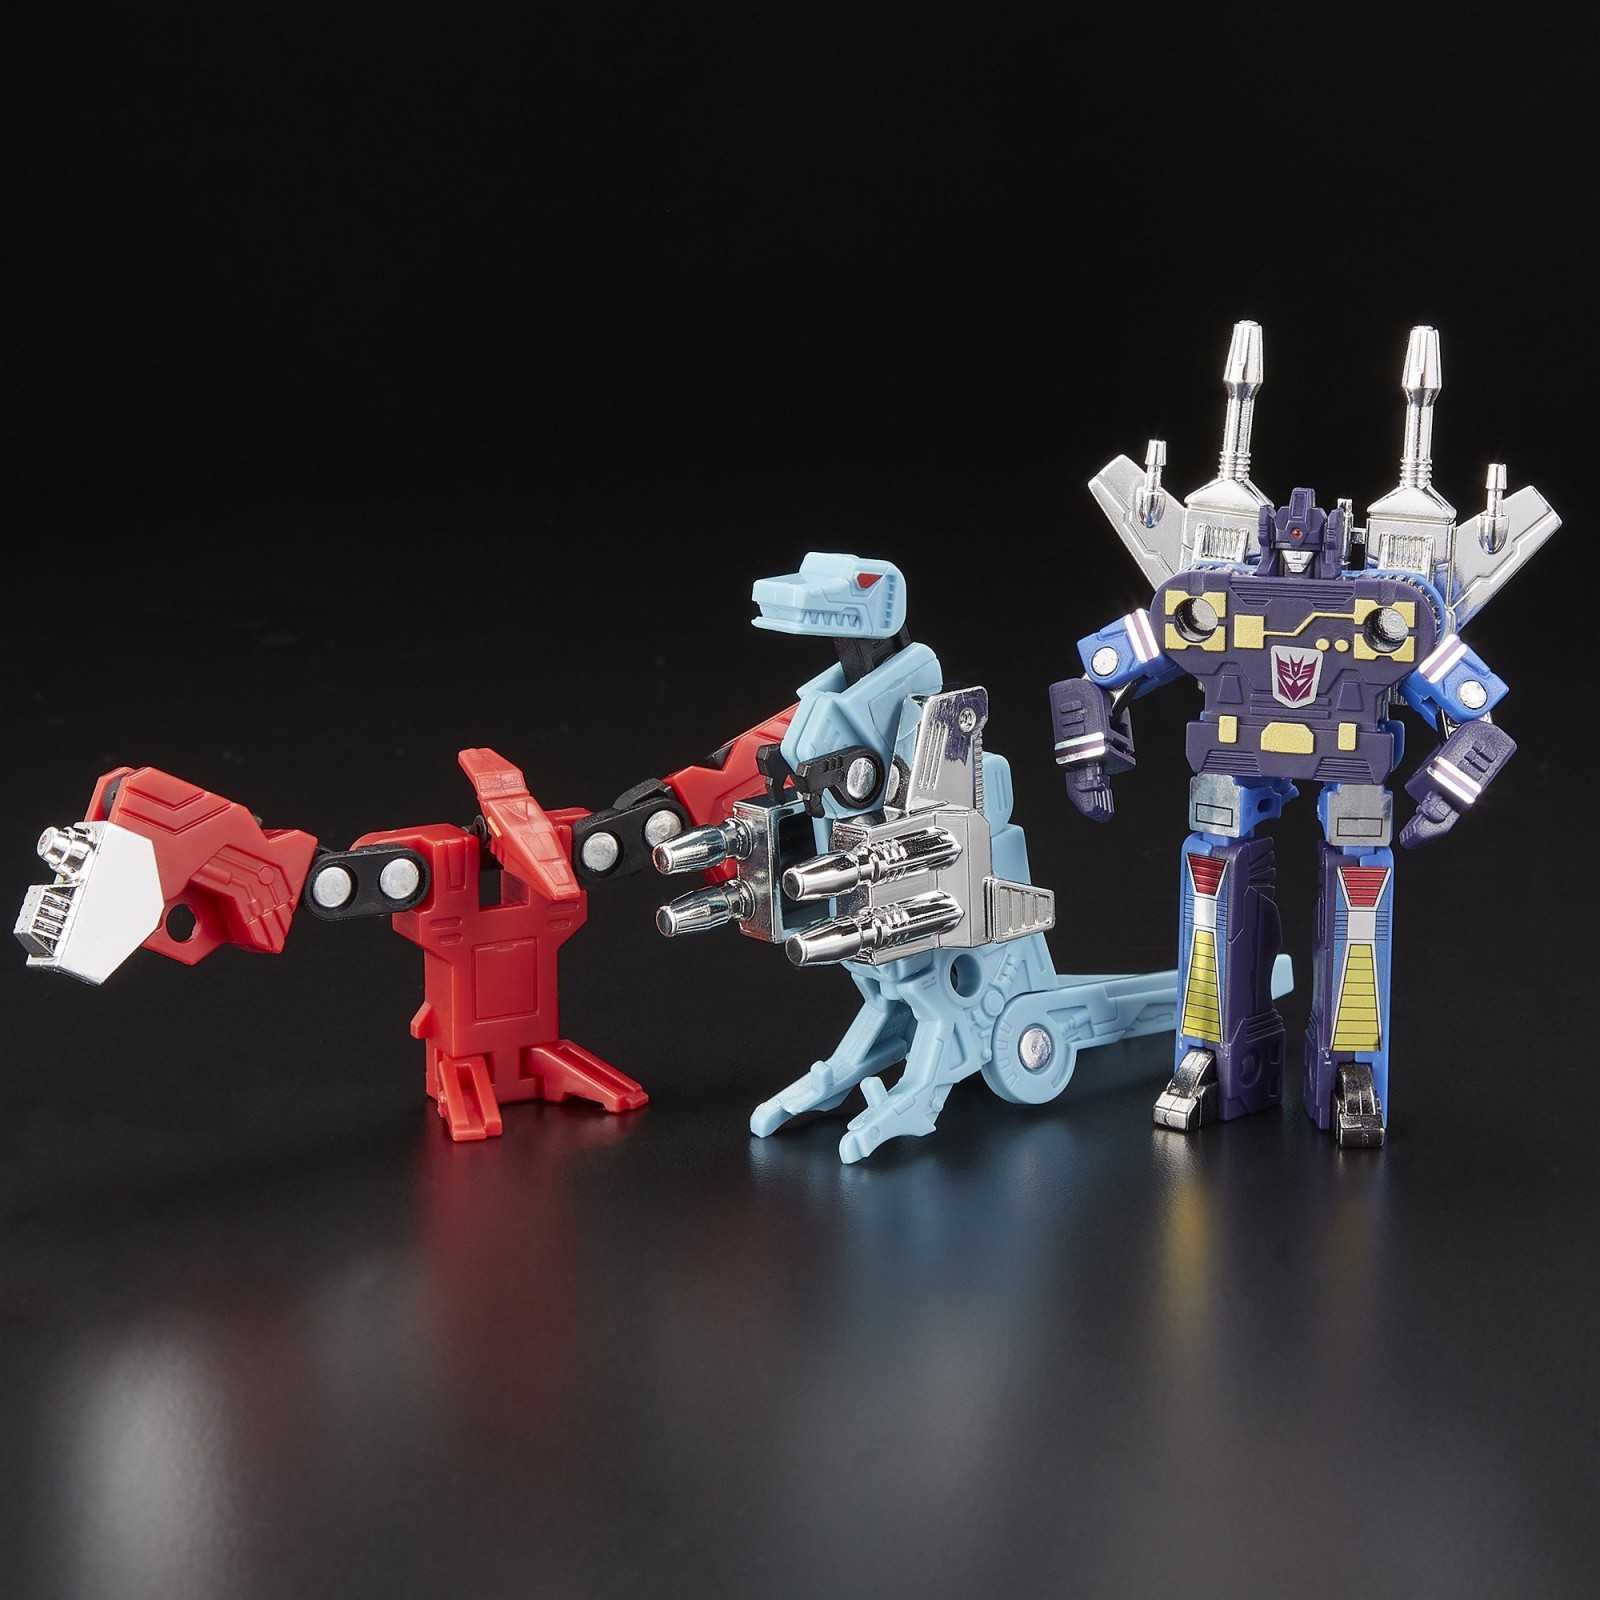 Transformers News: Payments Processing for Gurafi Noizu Frenzy Three Pack Revealed at SDCC2019 Should Be Shipping Soon